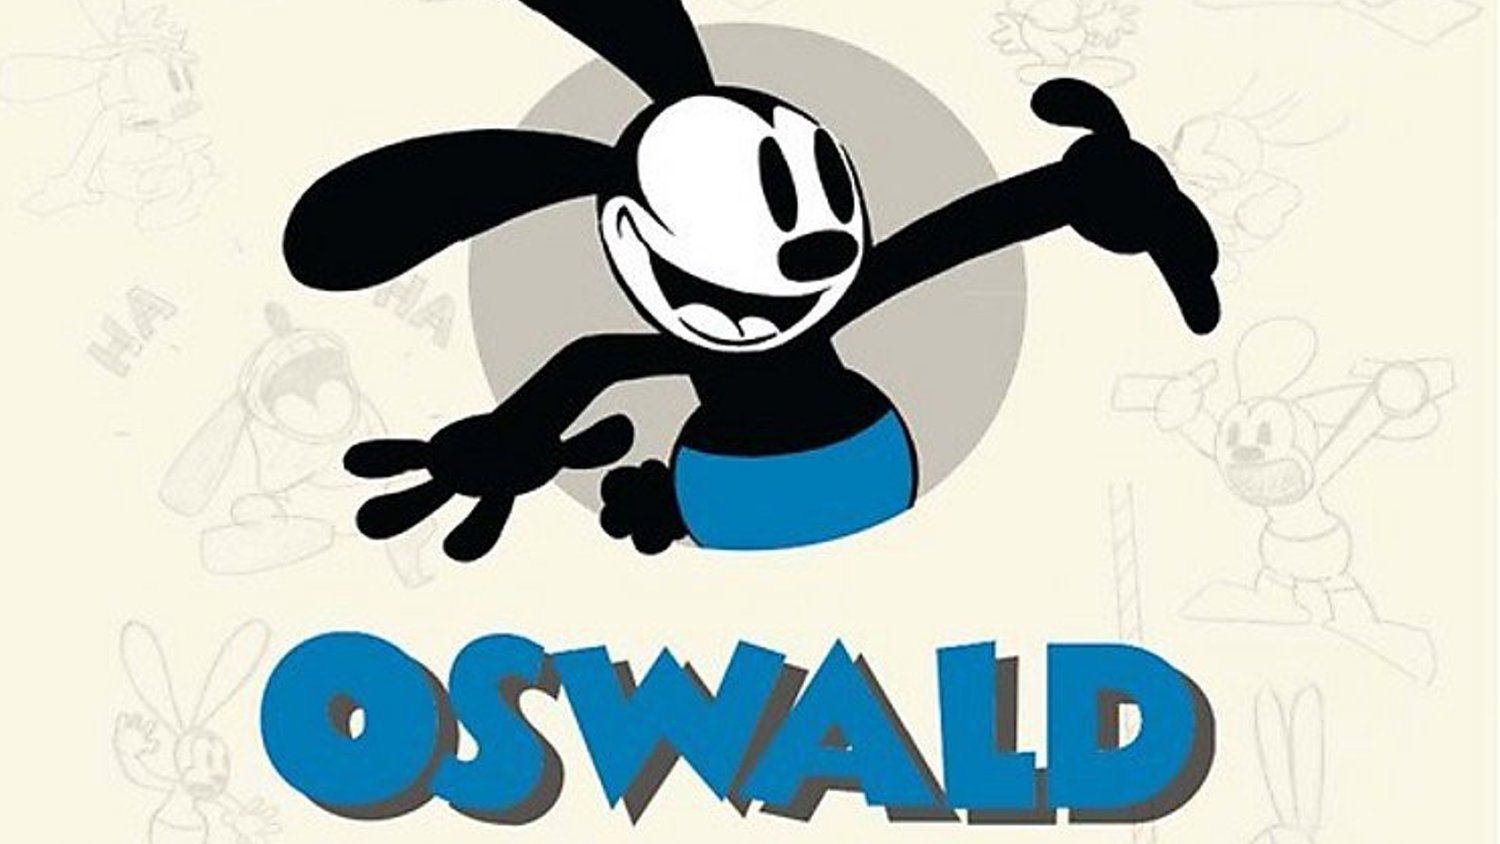 Walt Disney's Oswald The Lucky Rabbit Is Getting an Animated